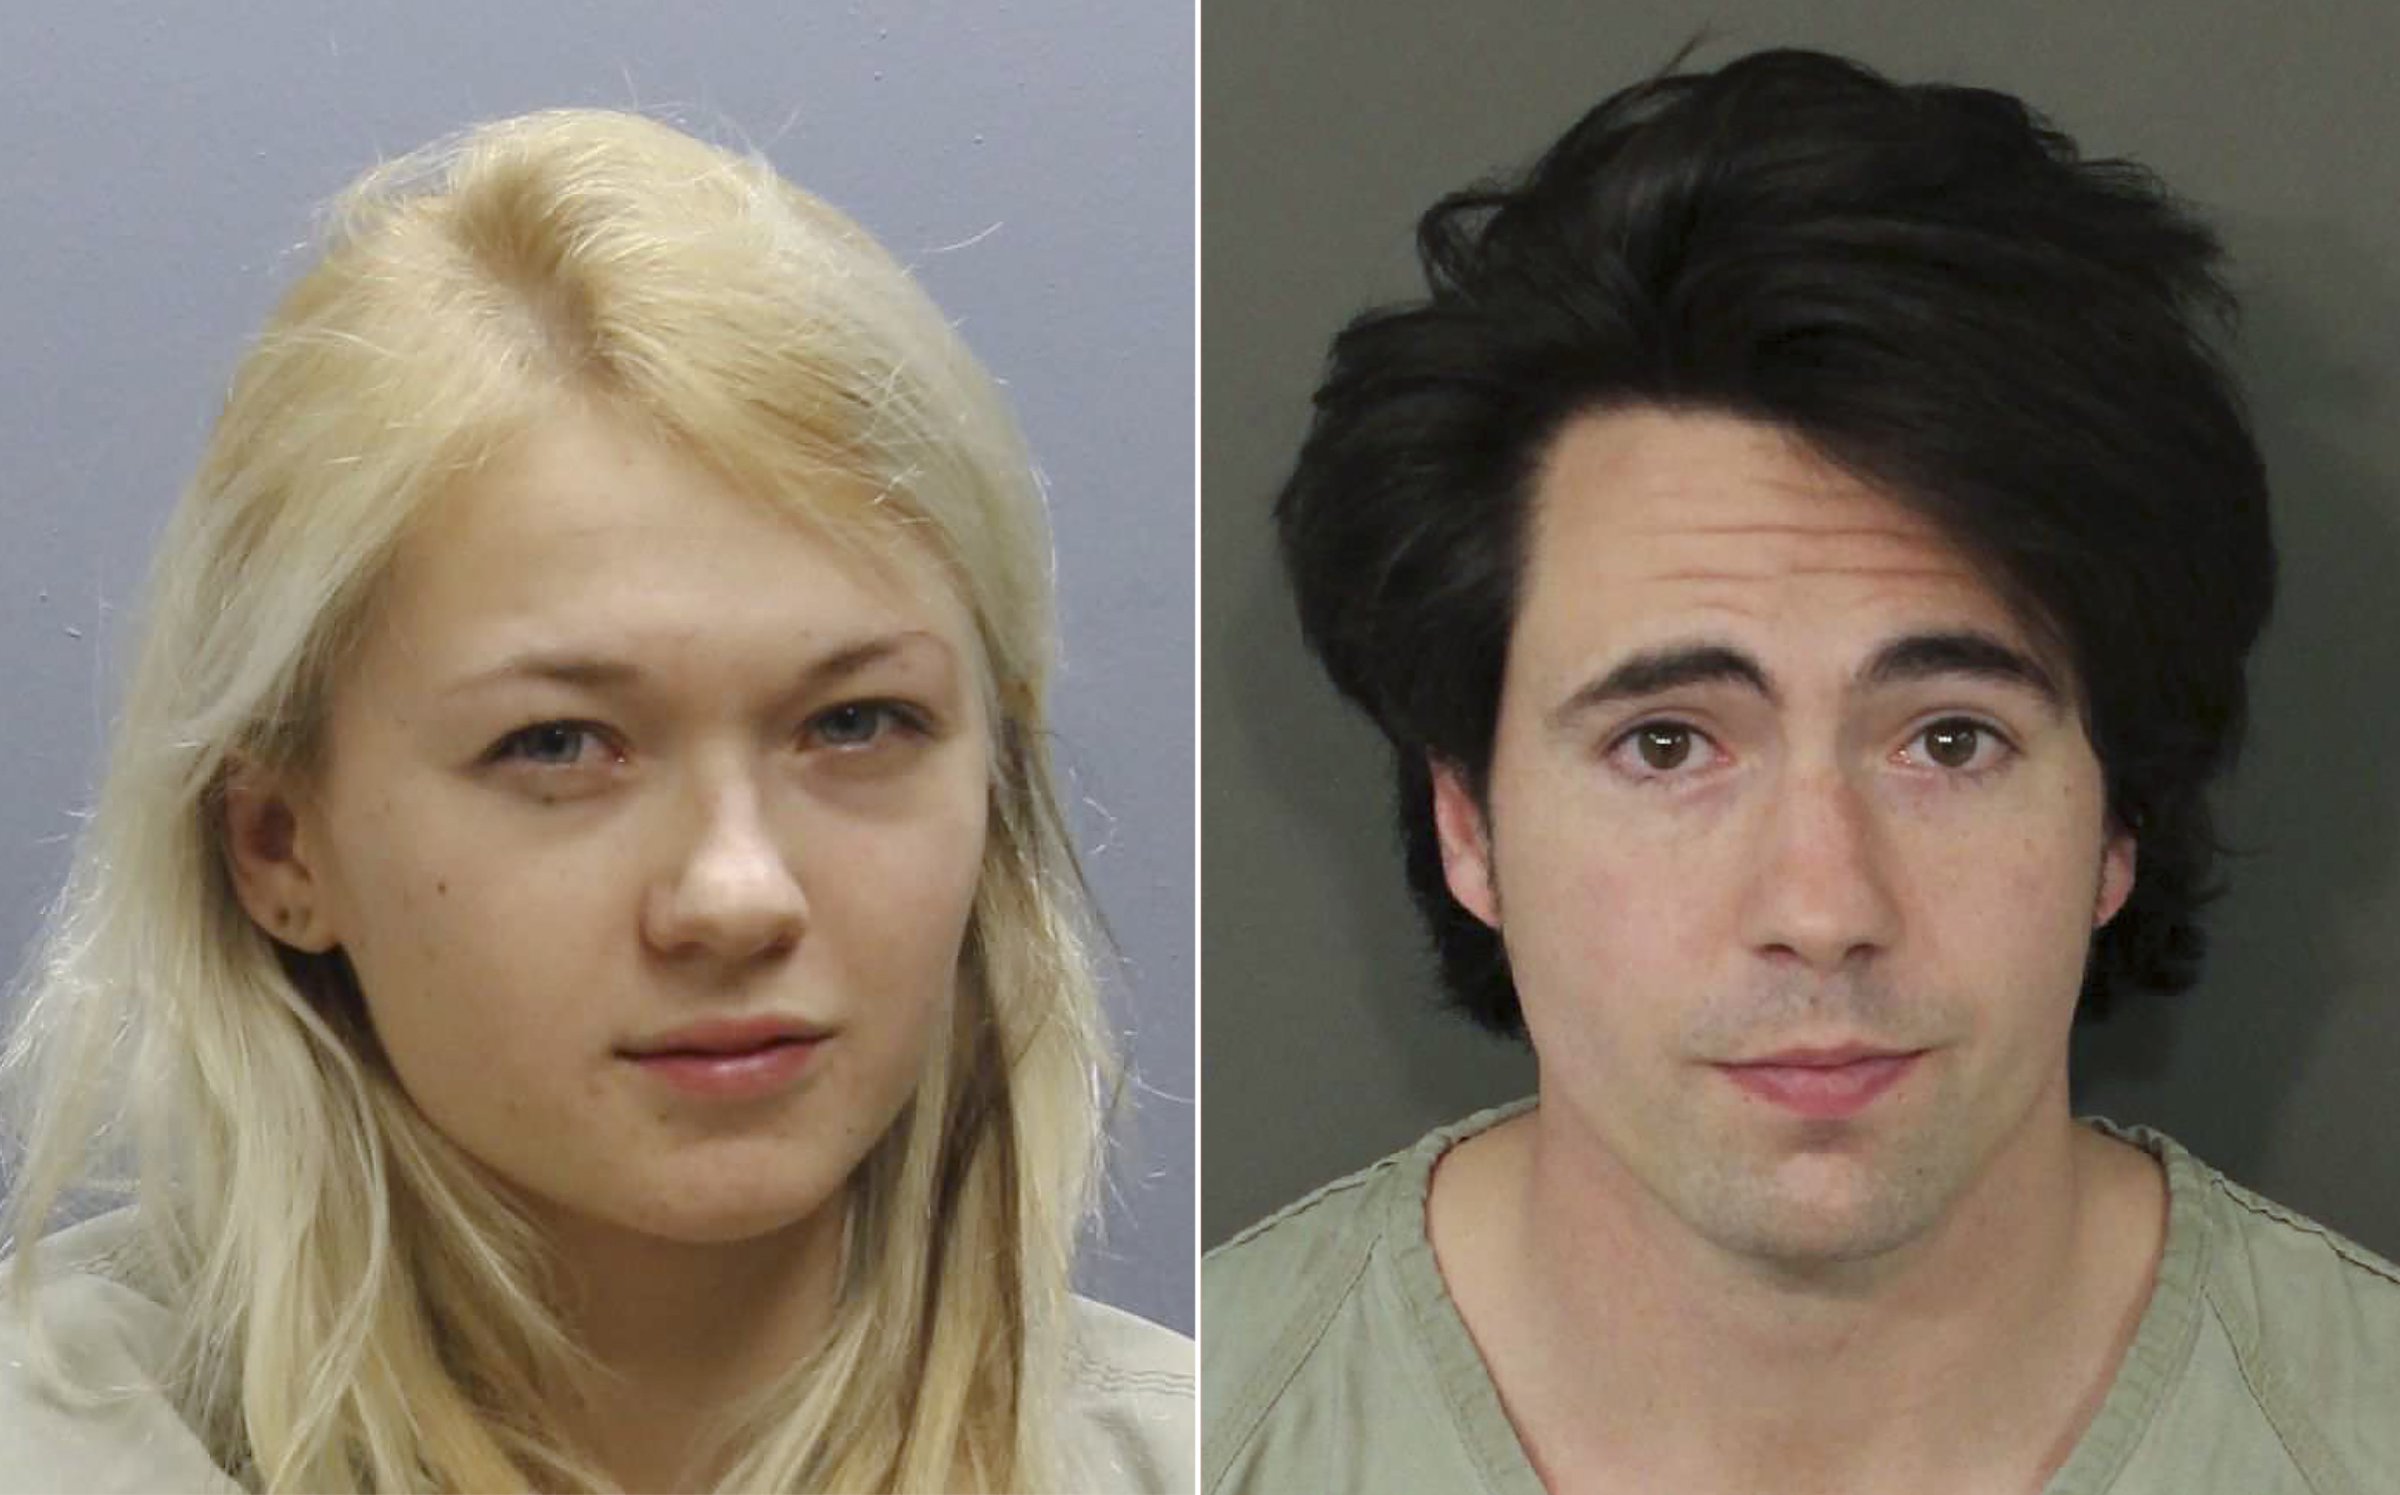 A composite image shows photos released by the Franklin County Sheriff's Office of Marina Lonina and Raymond Gates, who were charged April 13 with rape, kidnapping, sexual battery and pandering sexually oriented matter involving a minor, for allegedly using an app to livestream the rape of a 17-year-old girl.